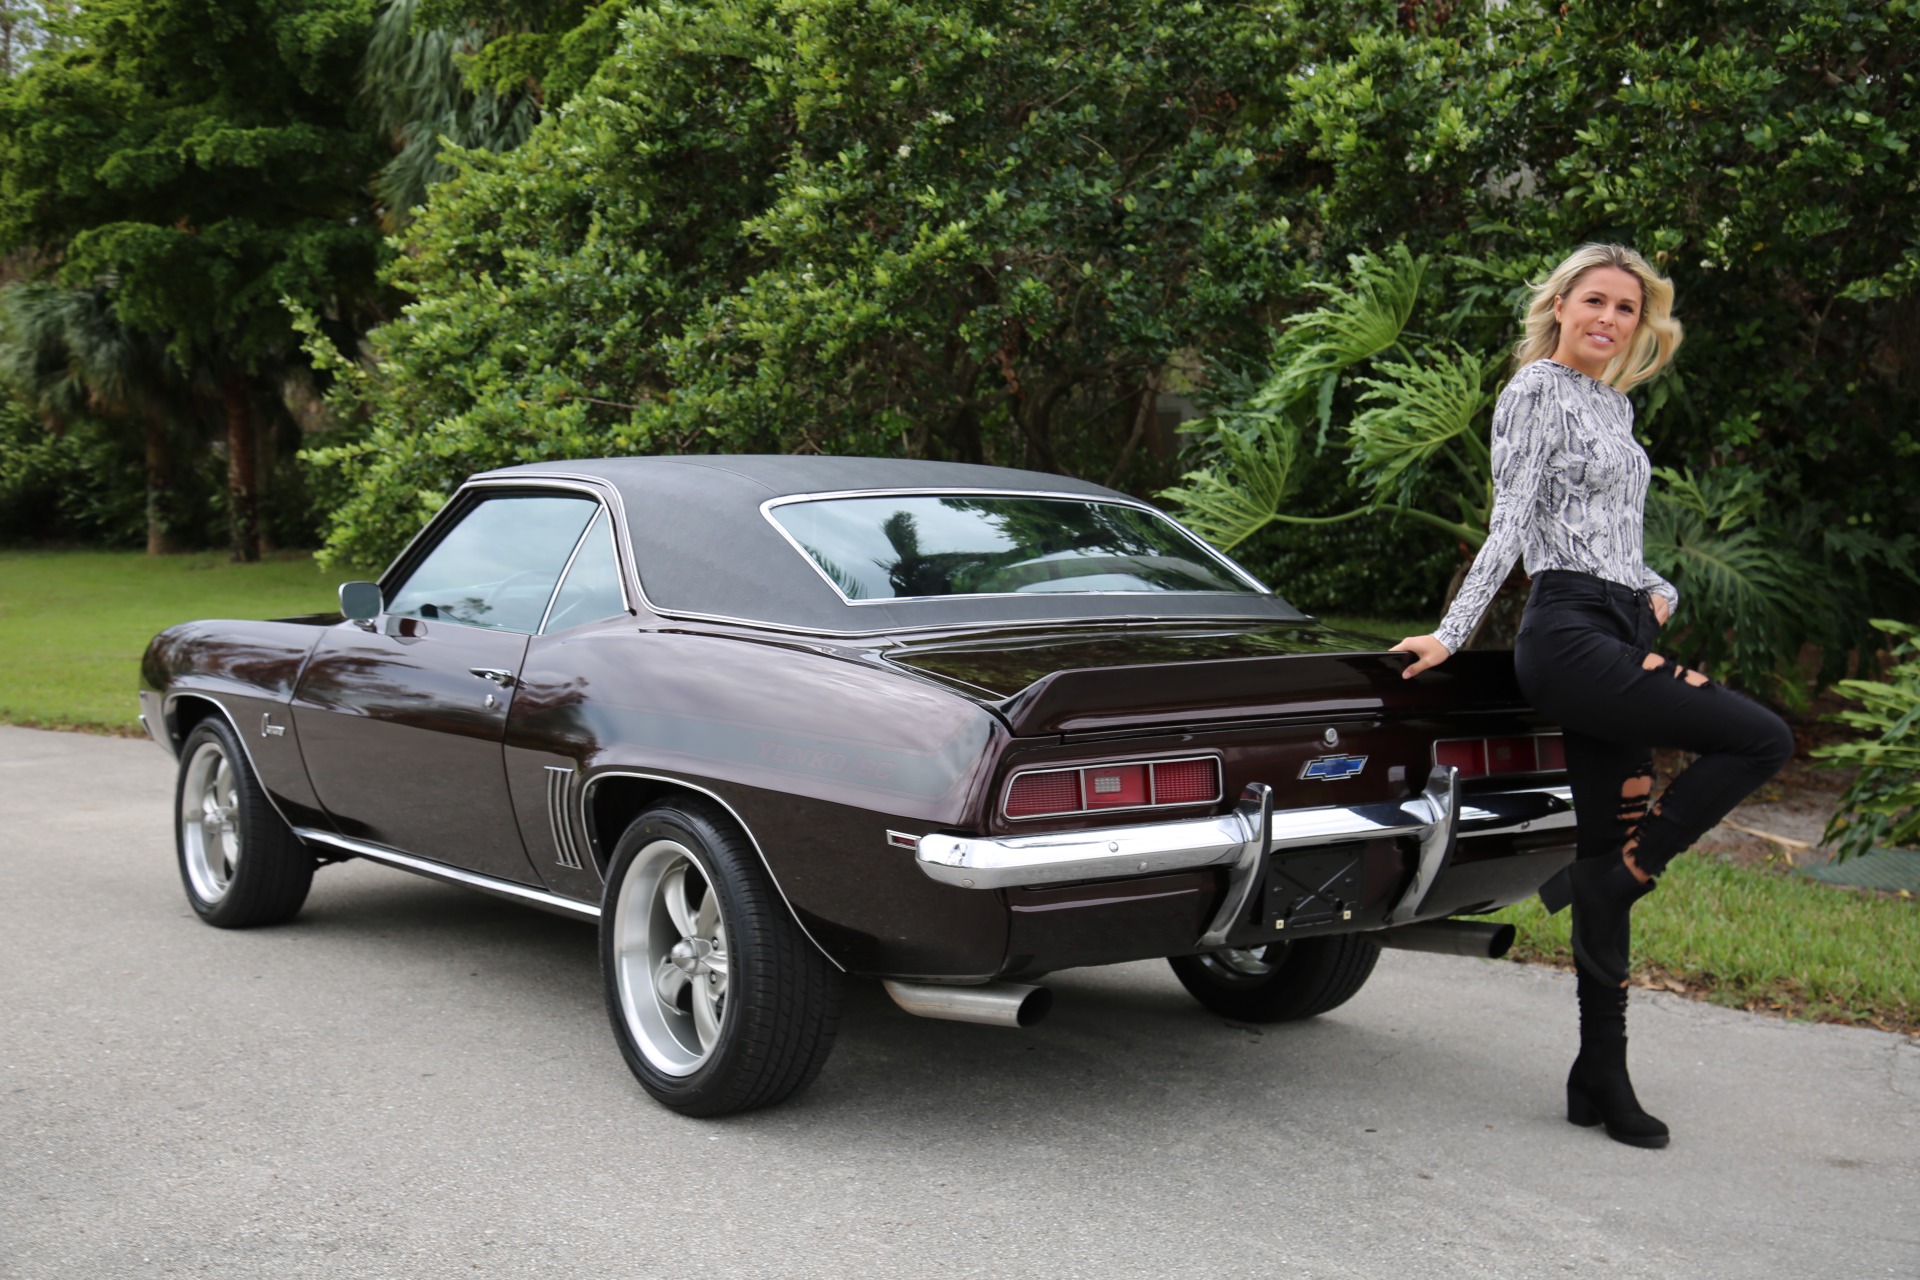 Used 1969 Chevrolet Camaro V8 4 Speed Manual for sale $47,000 at Muscle Cars for Sale Inc. in Fort Myers FL 33912 5